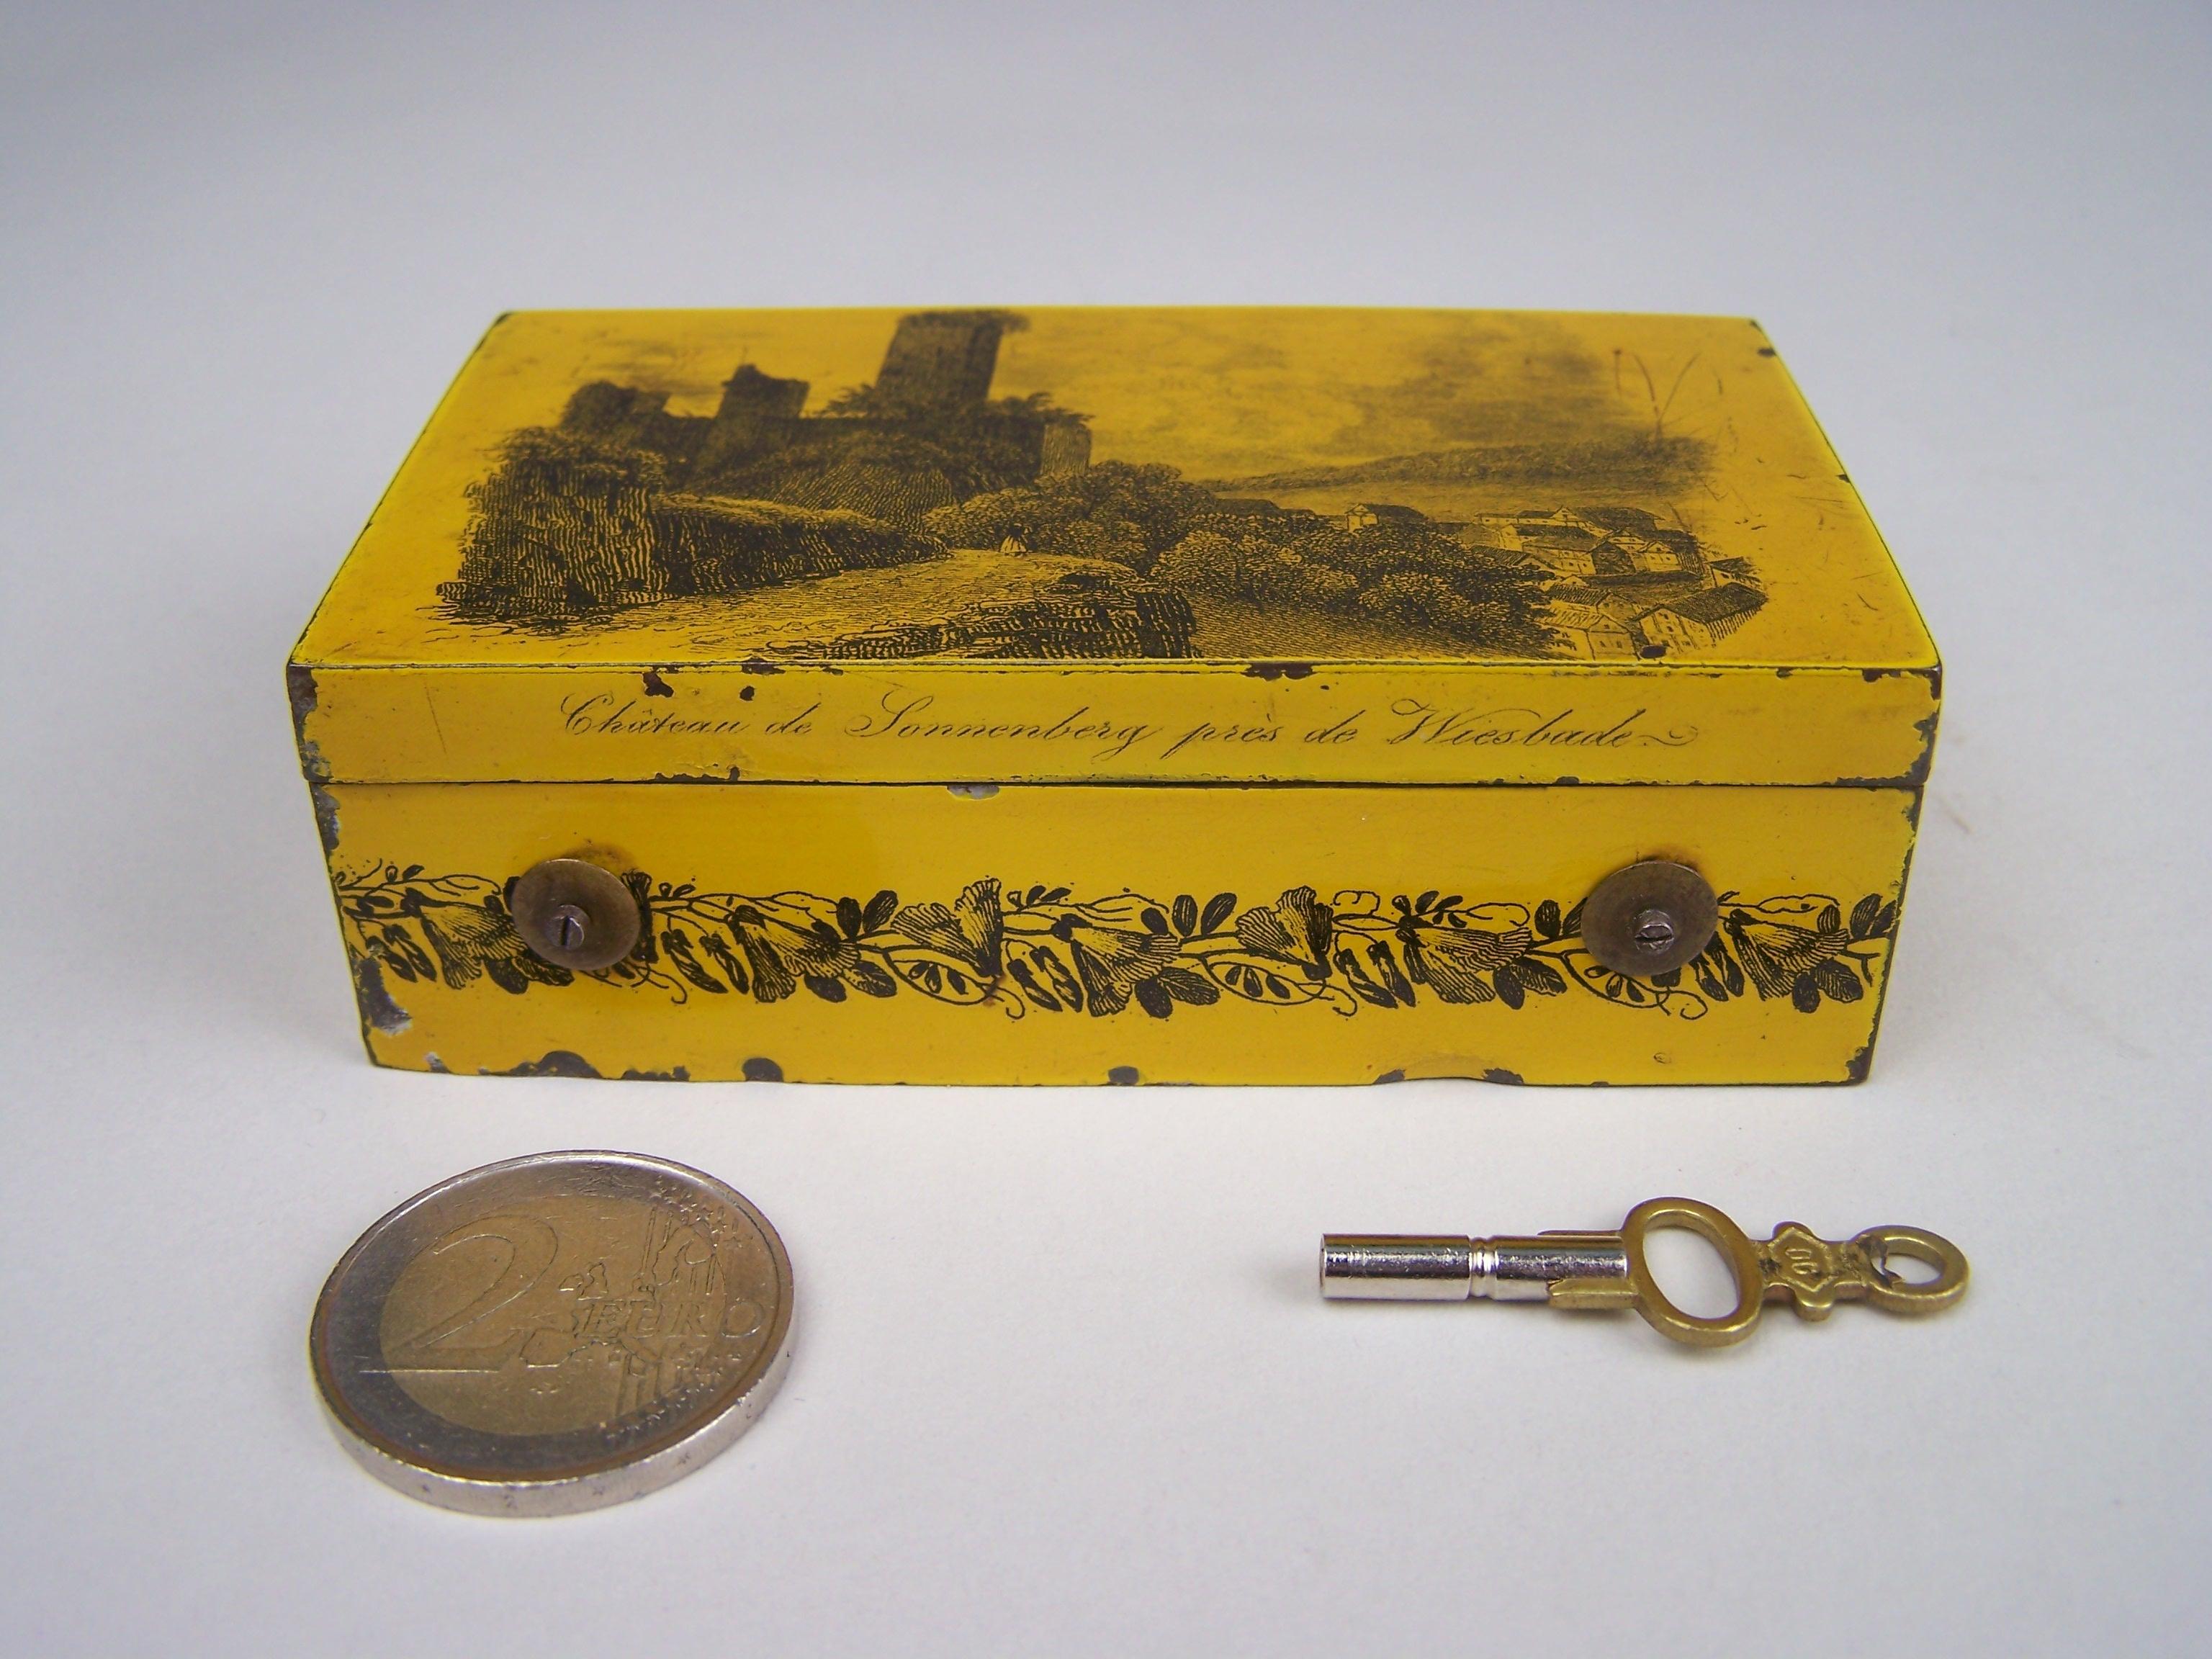 Musical souvenir box made in Switzerland in the 19th century for the German marker

This rare snuffbox plays 2 melodies.  Indicated on the inside of the lid.

The case is made of metal with a transfert print on Top and sides. At the front the